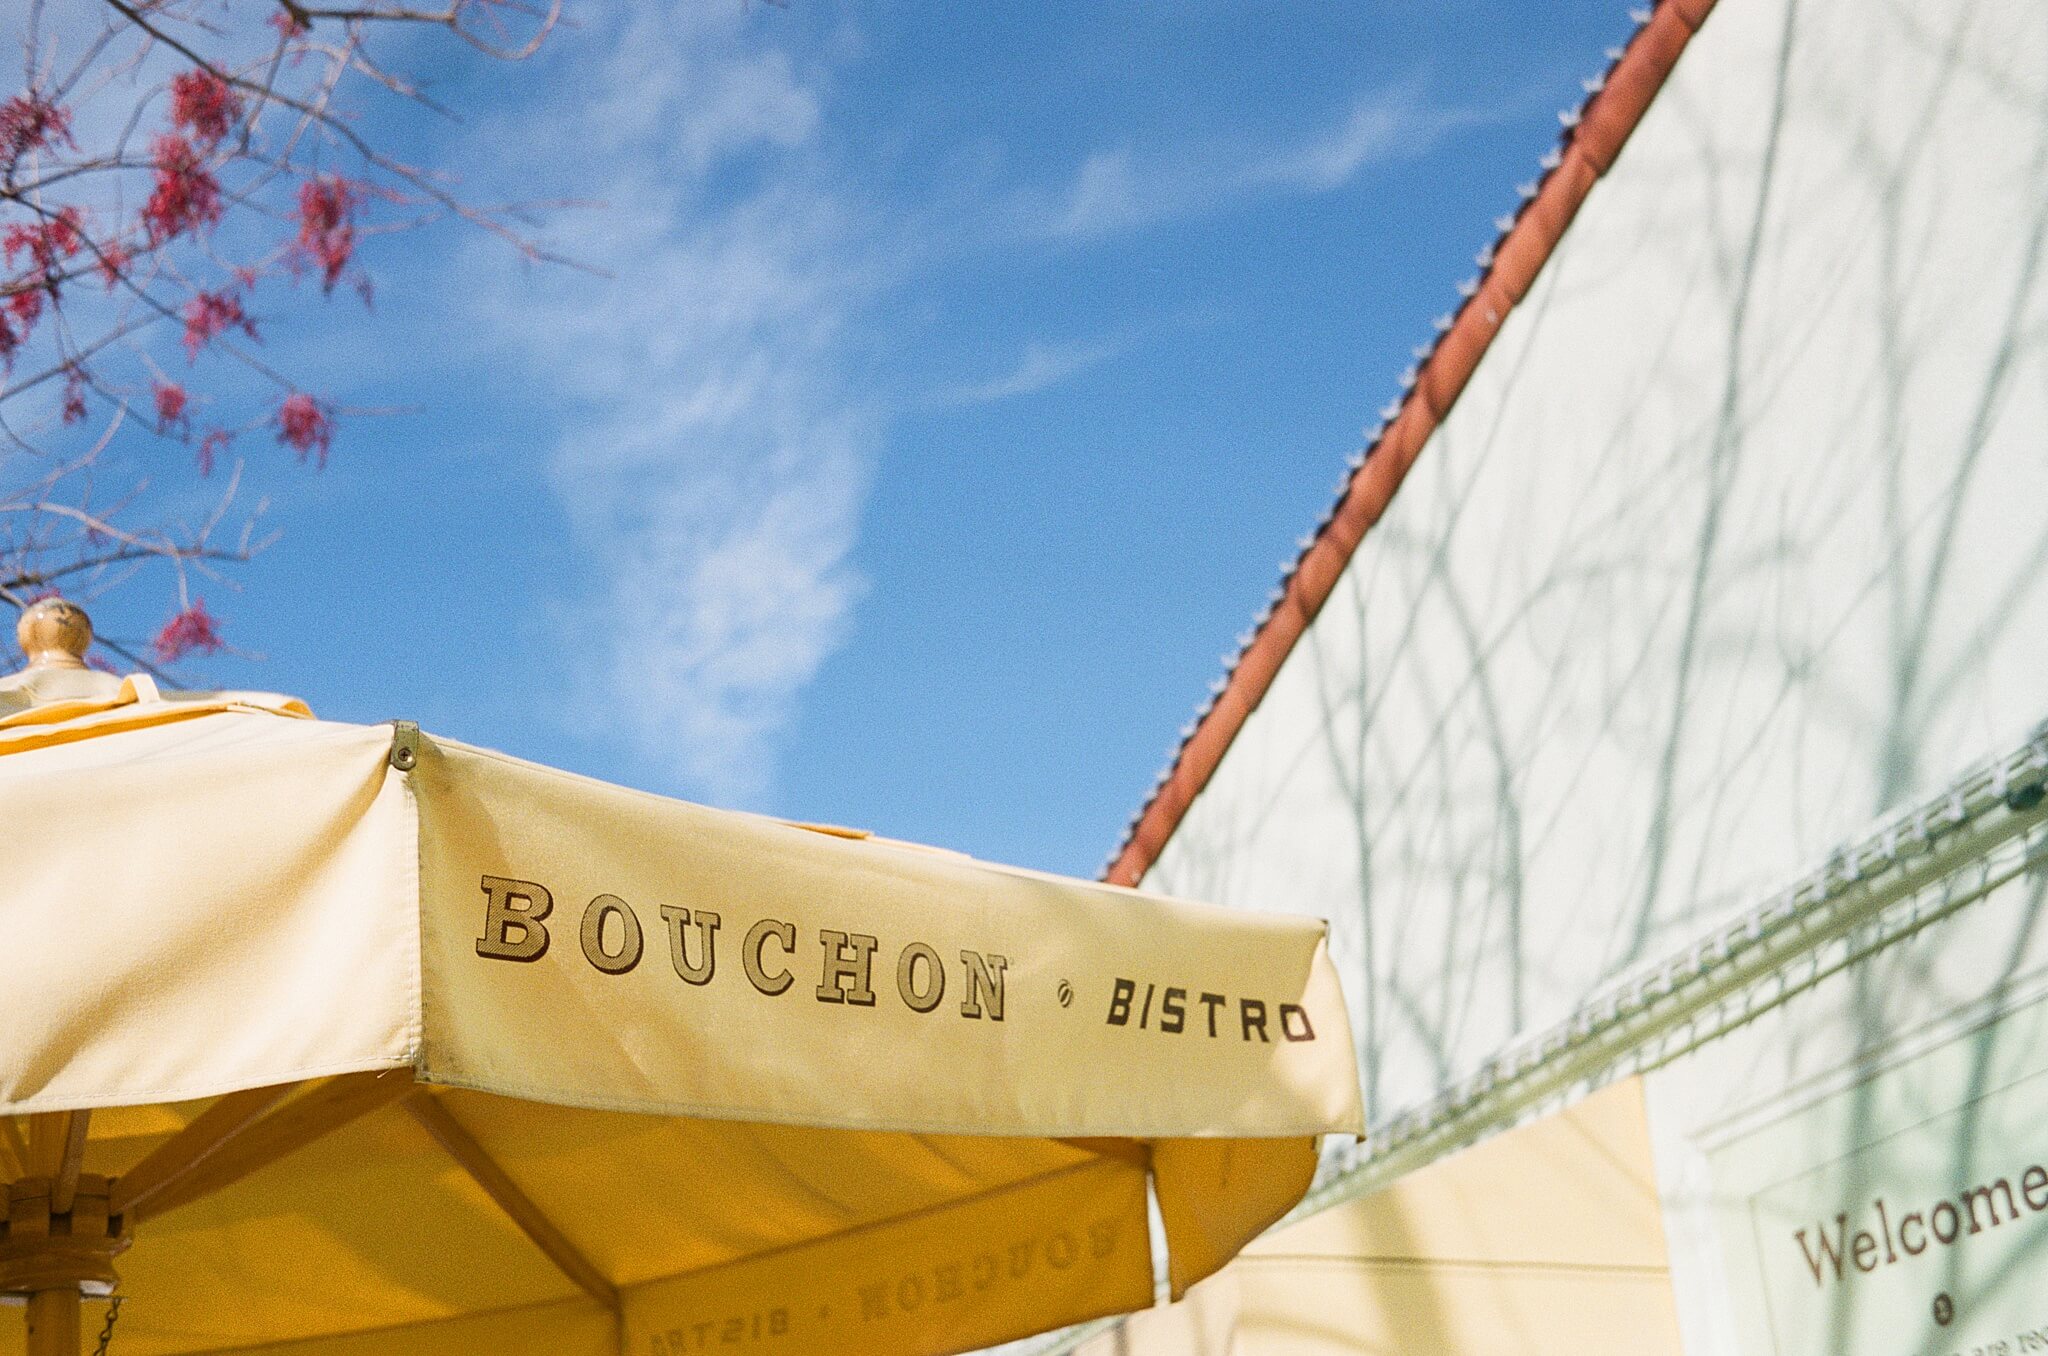 roller 35 sample image. A sunny yellow patio umbrella with the words "bouchon bistro" emblazoned across a flap contrasts with the clear blue sky.